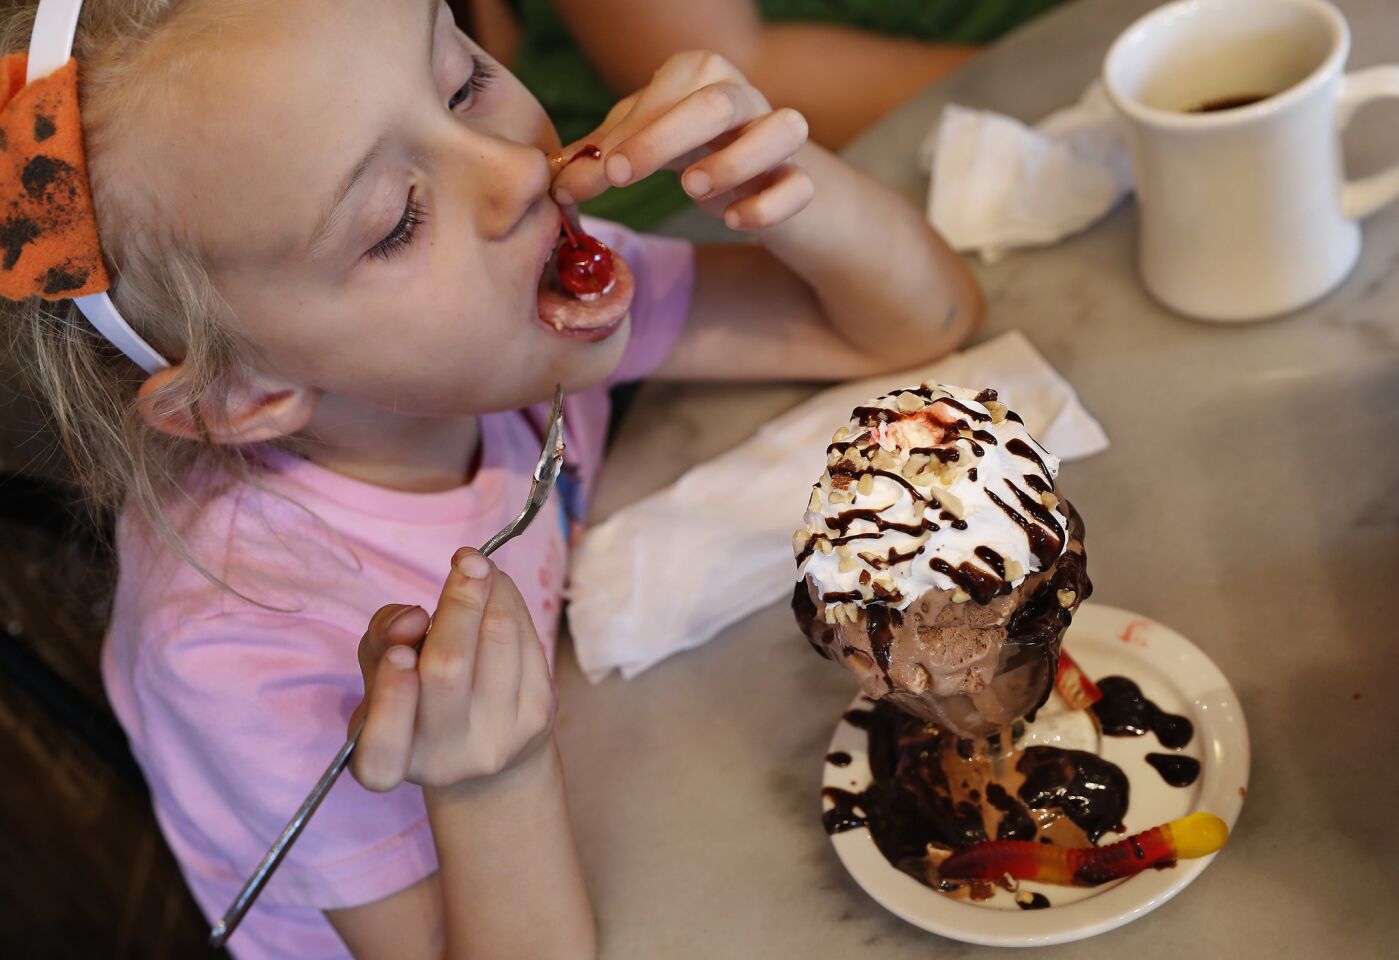 If you're feeling hungry again, or just because, head on over to Fair Oaks Pharmacy, one of the last old-school soda fountains in the Los Angeles area, where Clara Barlow, 6, of Burbank, enjoys a kid-size sundae with a cherry on top.